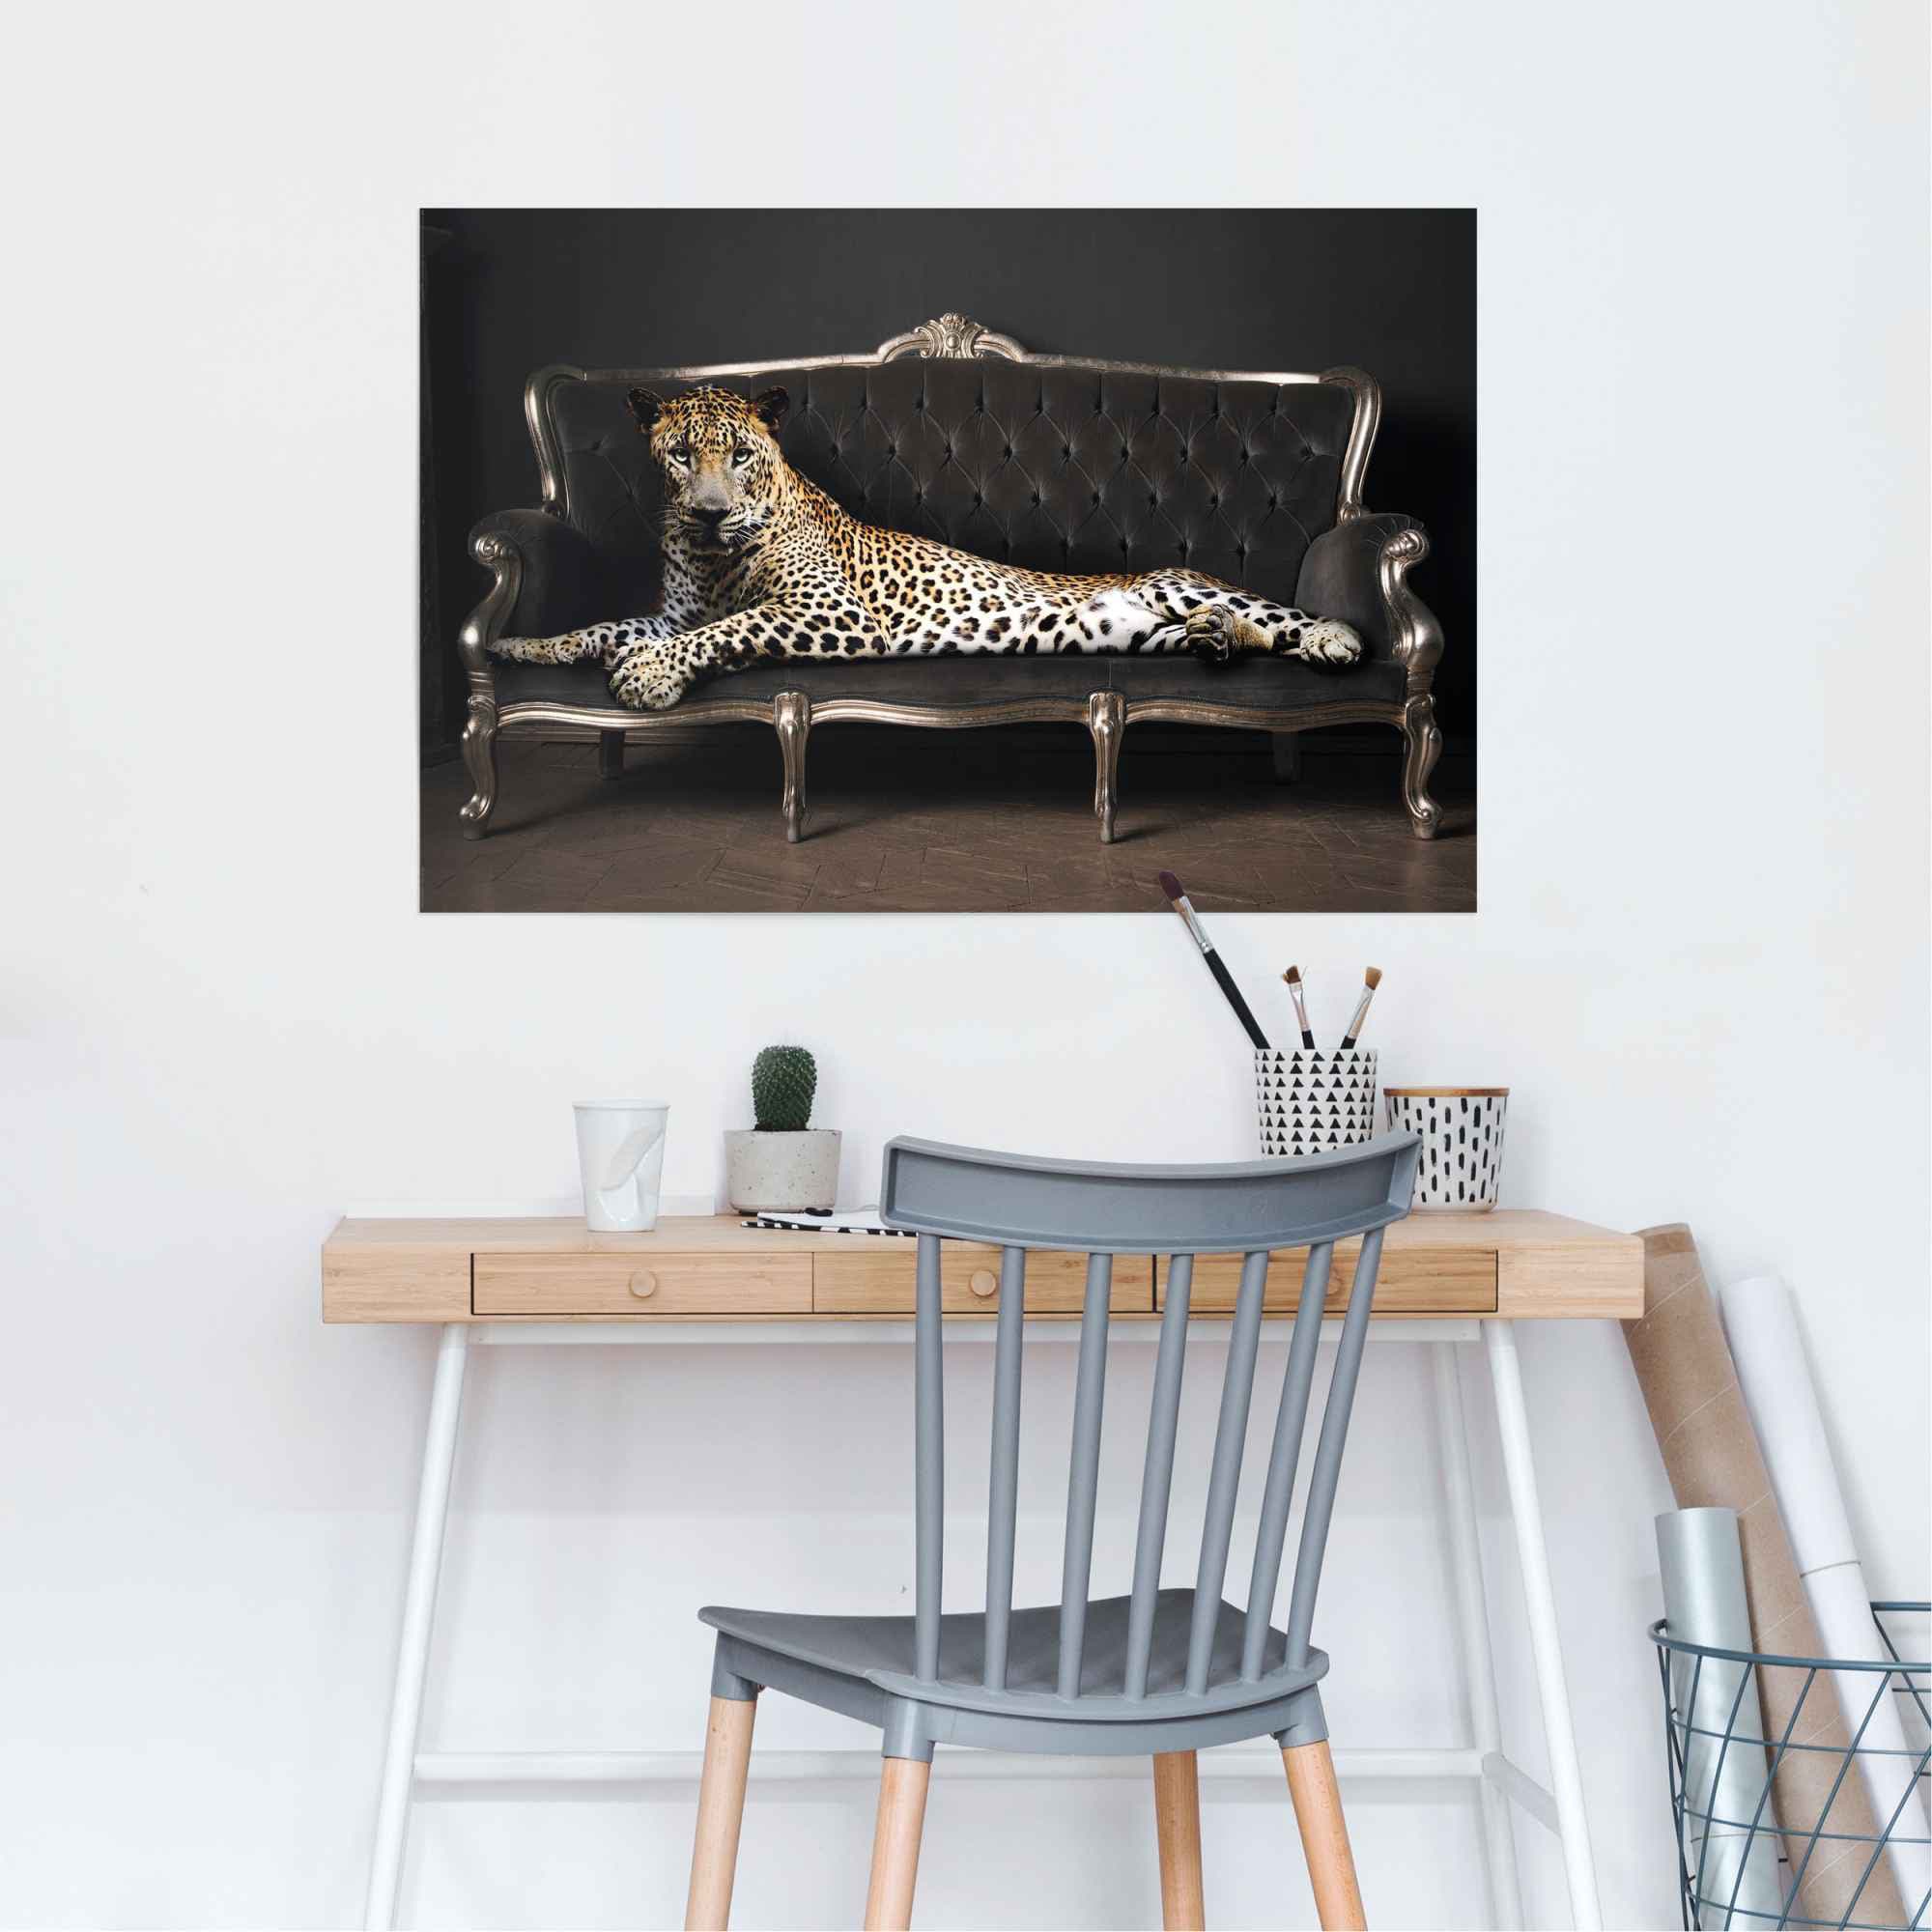 Panther St.) »Leopard Luxus Liegend Poster - - Reinders! Relax«, bei - (1 OTTO Chic